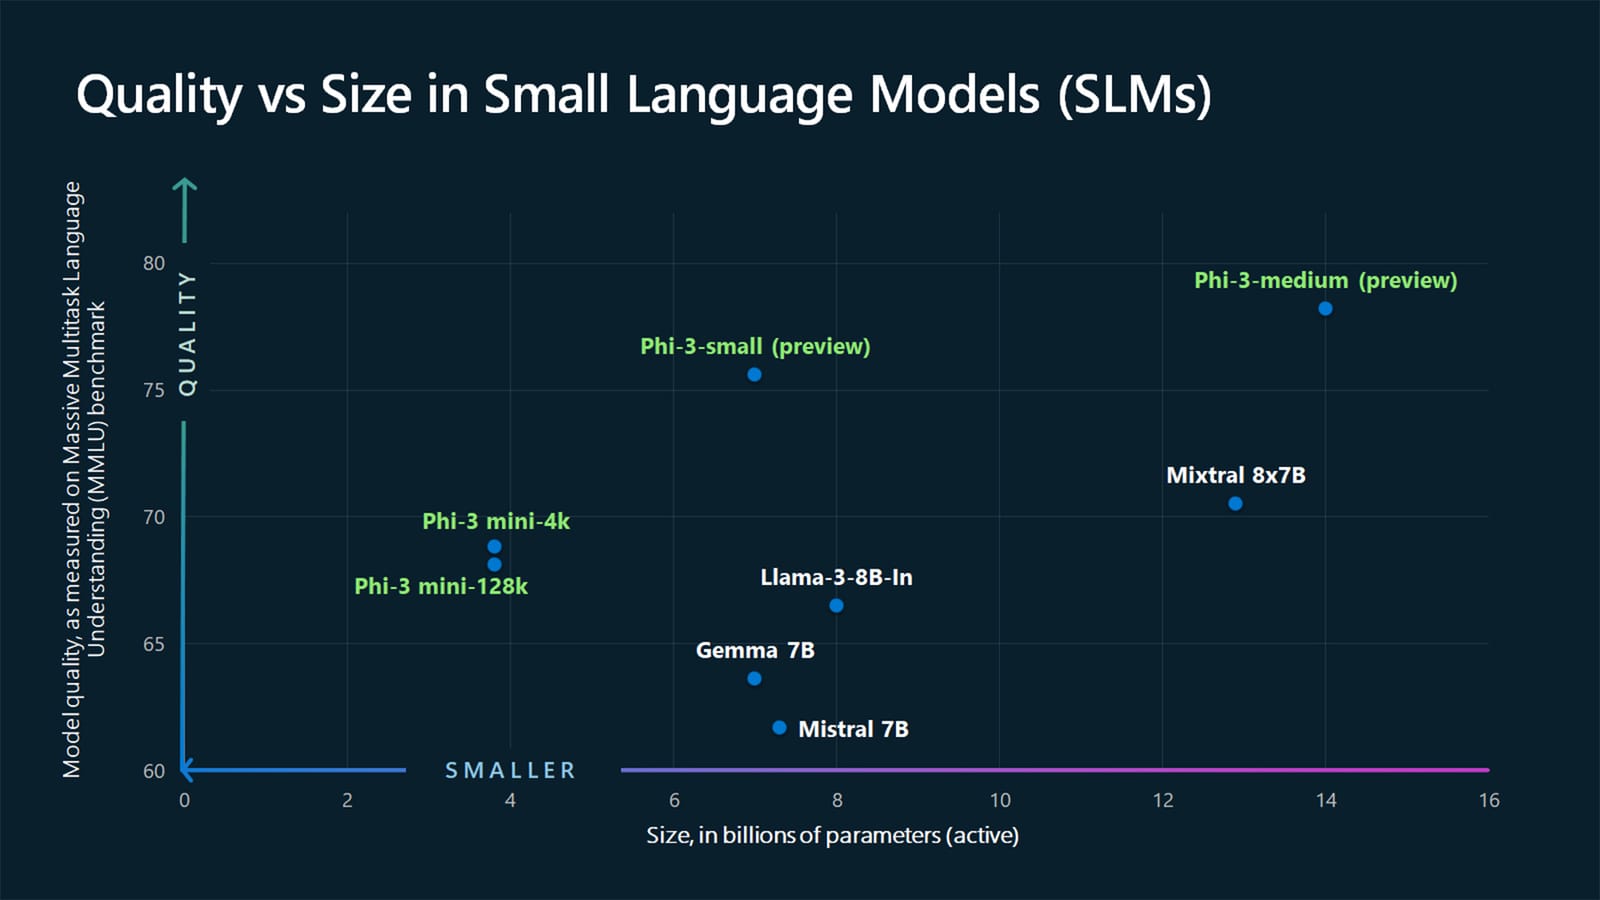 'Tiny but mighty' is how Microsoft describes Phi-3, its new family of small language models post image